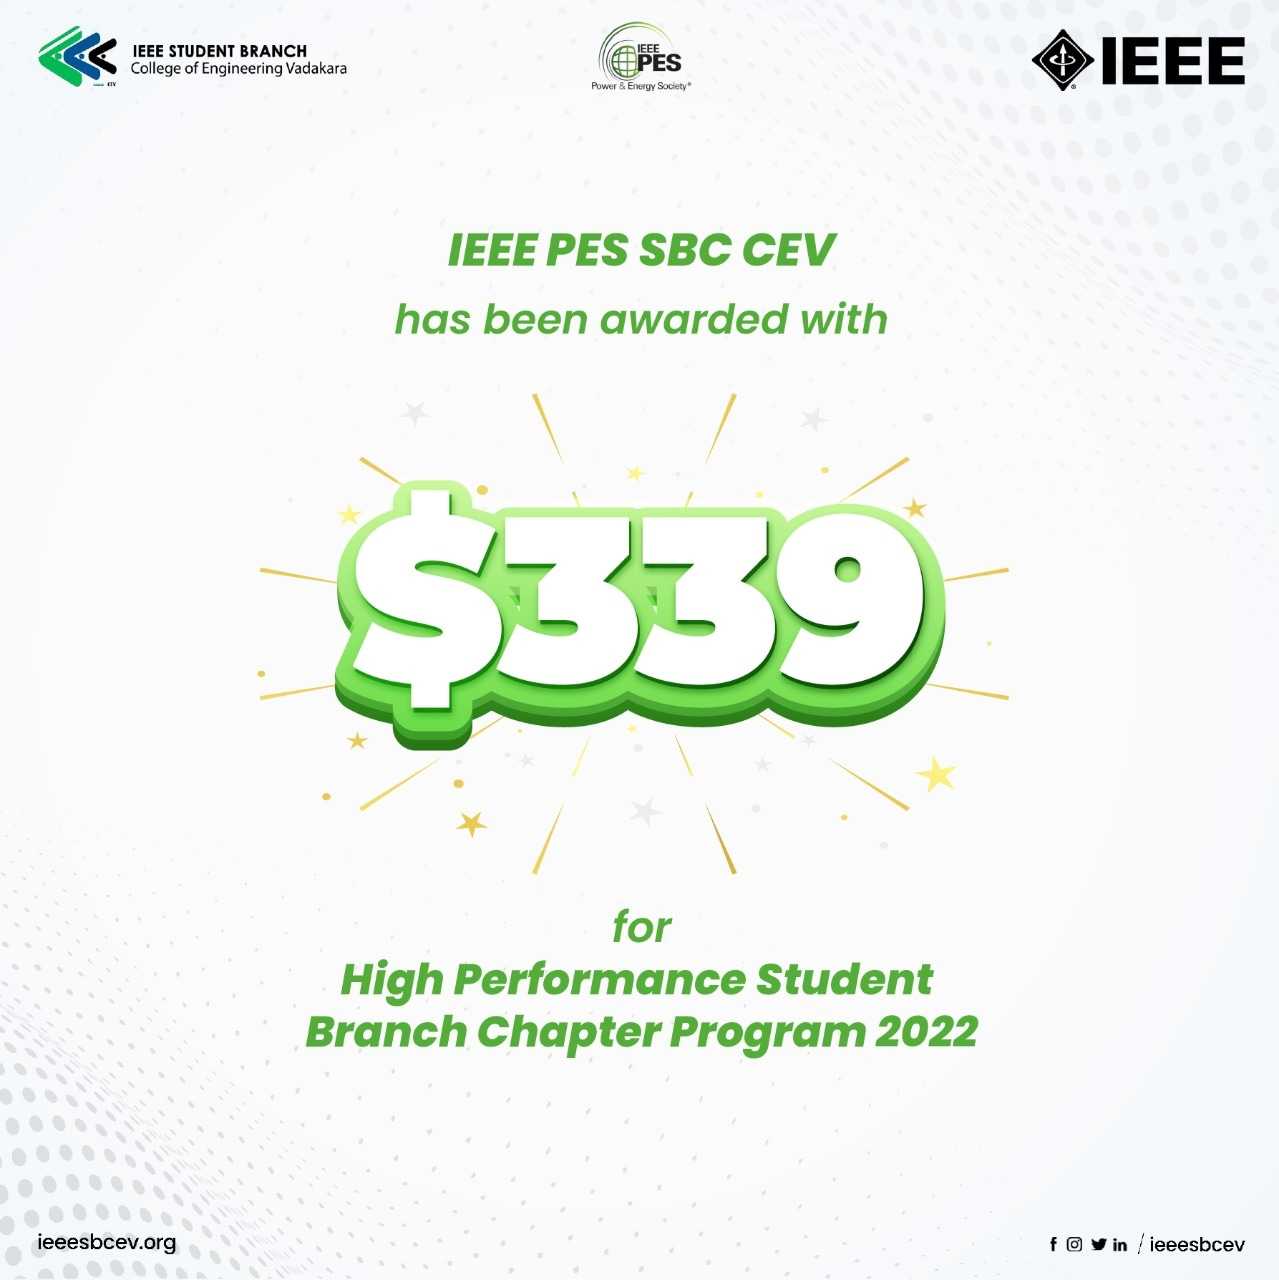 IEEE PES SBC CEV Awarded for HPSBCP 2022